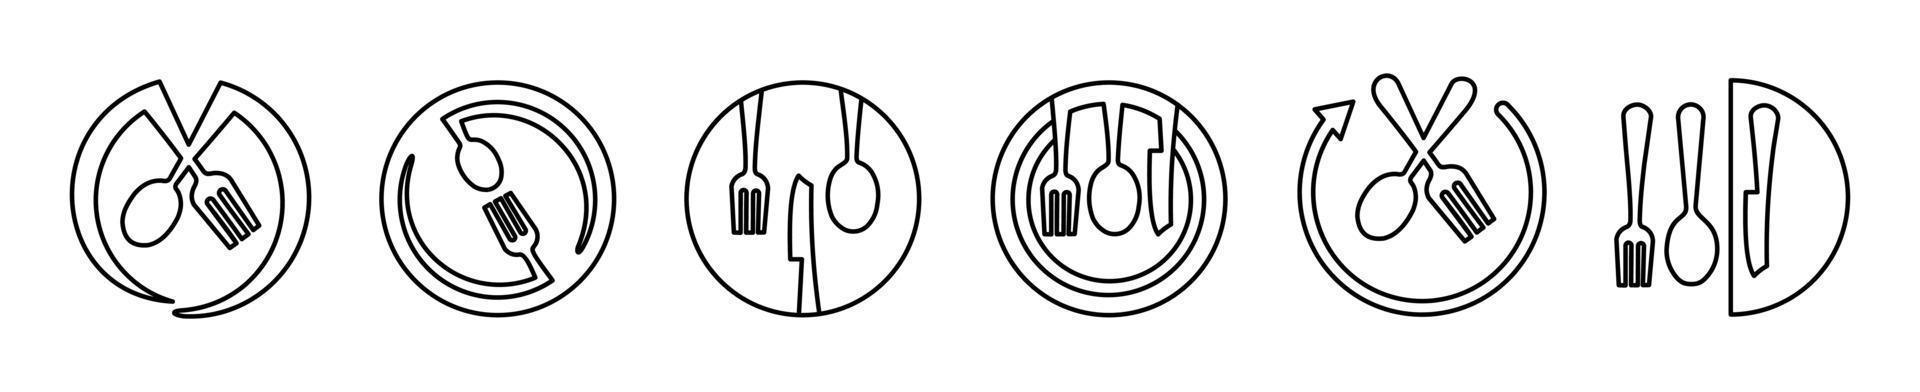 Tableware Vector illustration spoon, Fork, knife, and plate icon set in line style, Dinner service collection